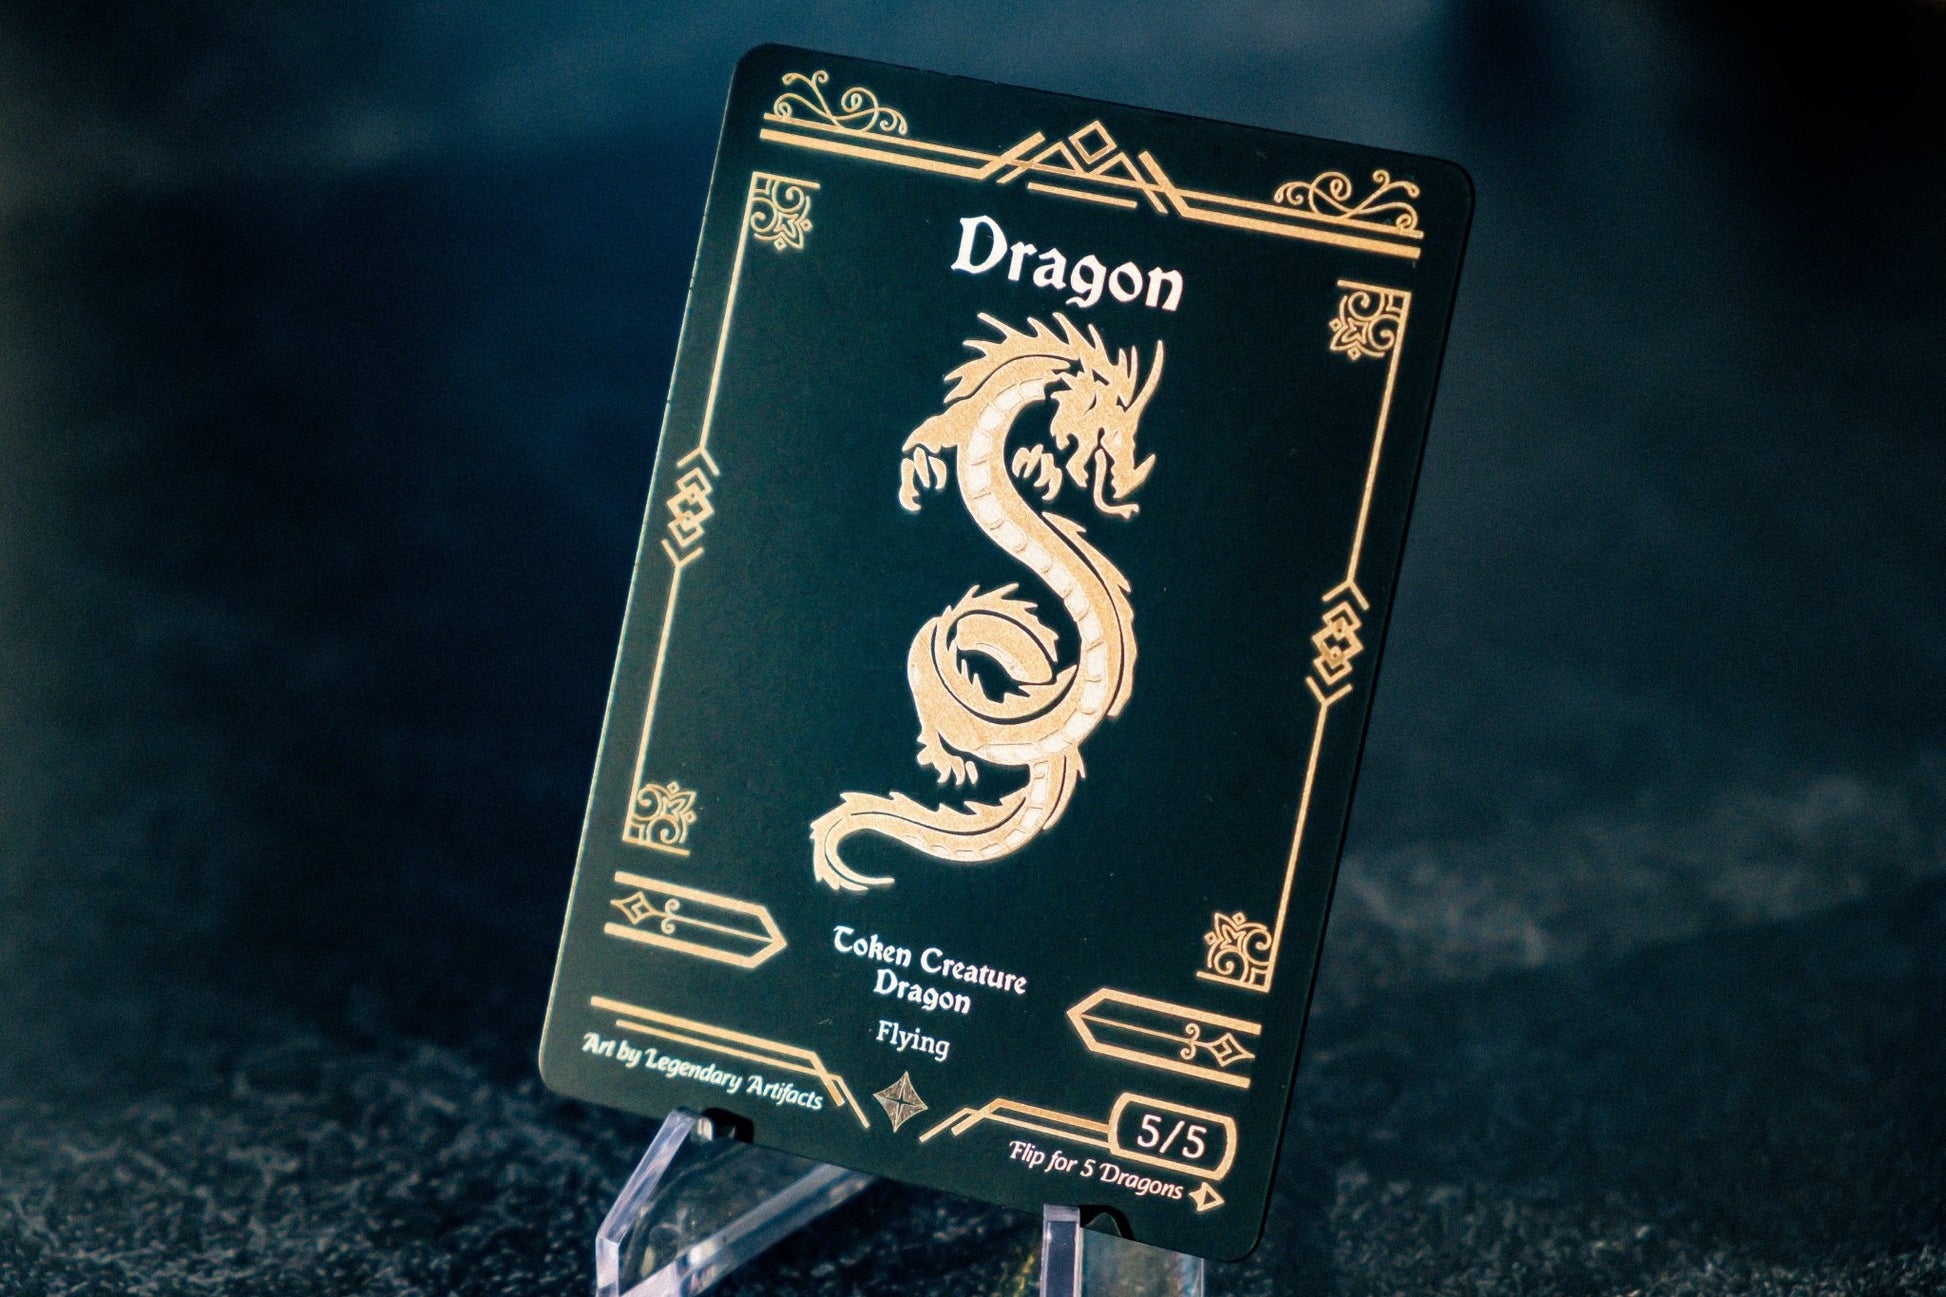 Engraved Steel Dragon Token, Double Sided - Legendary Artifacts